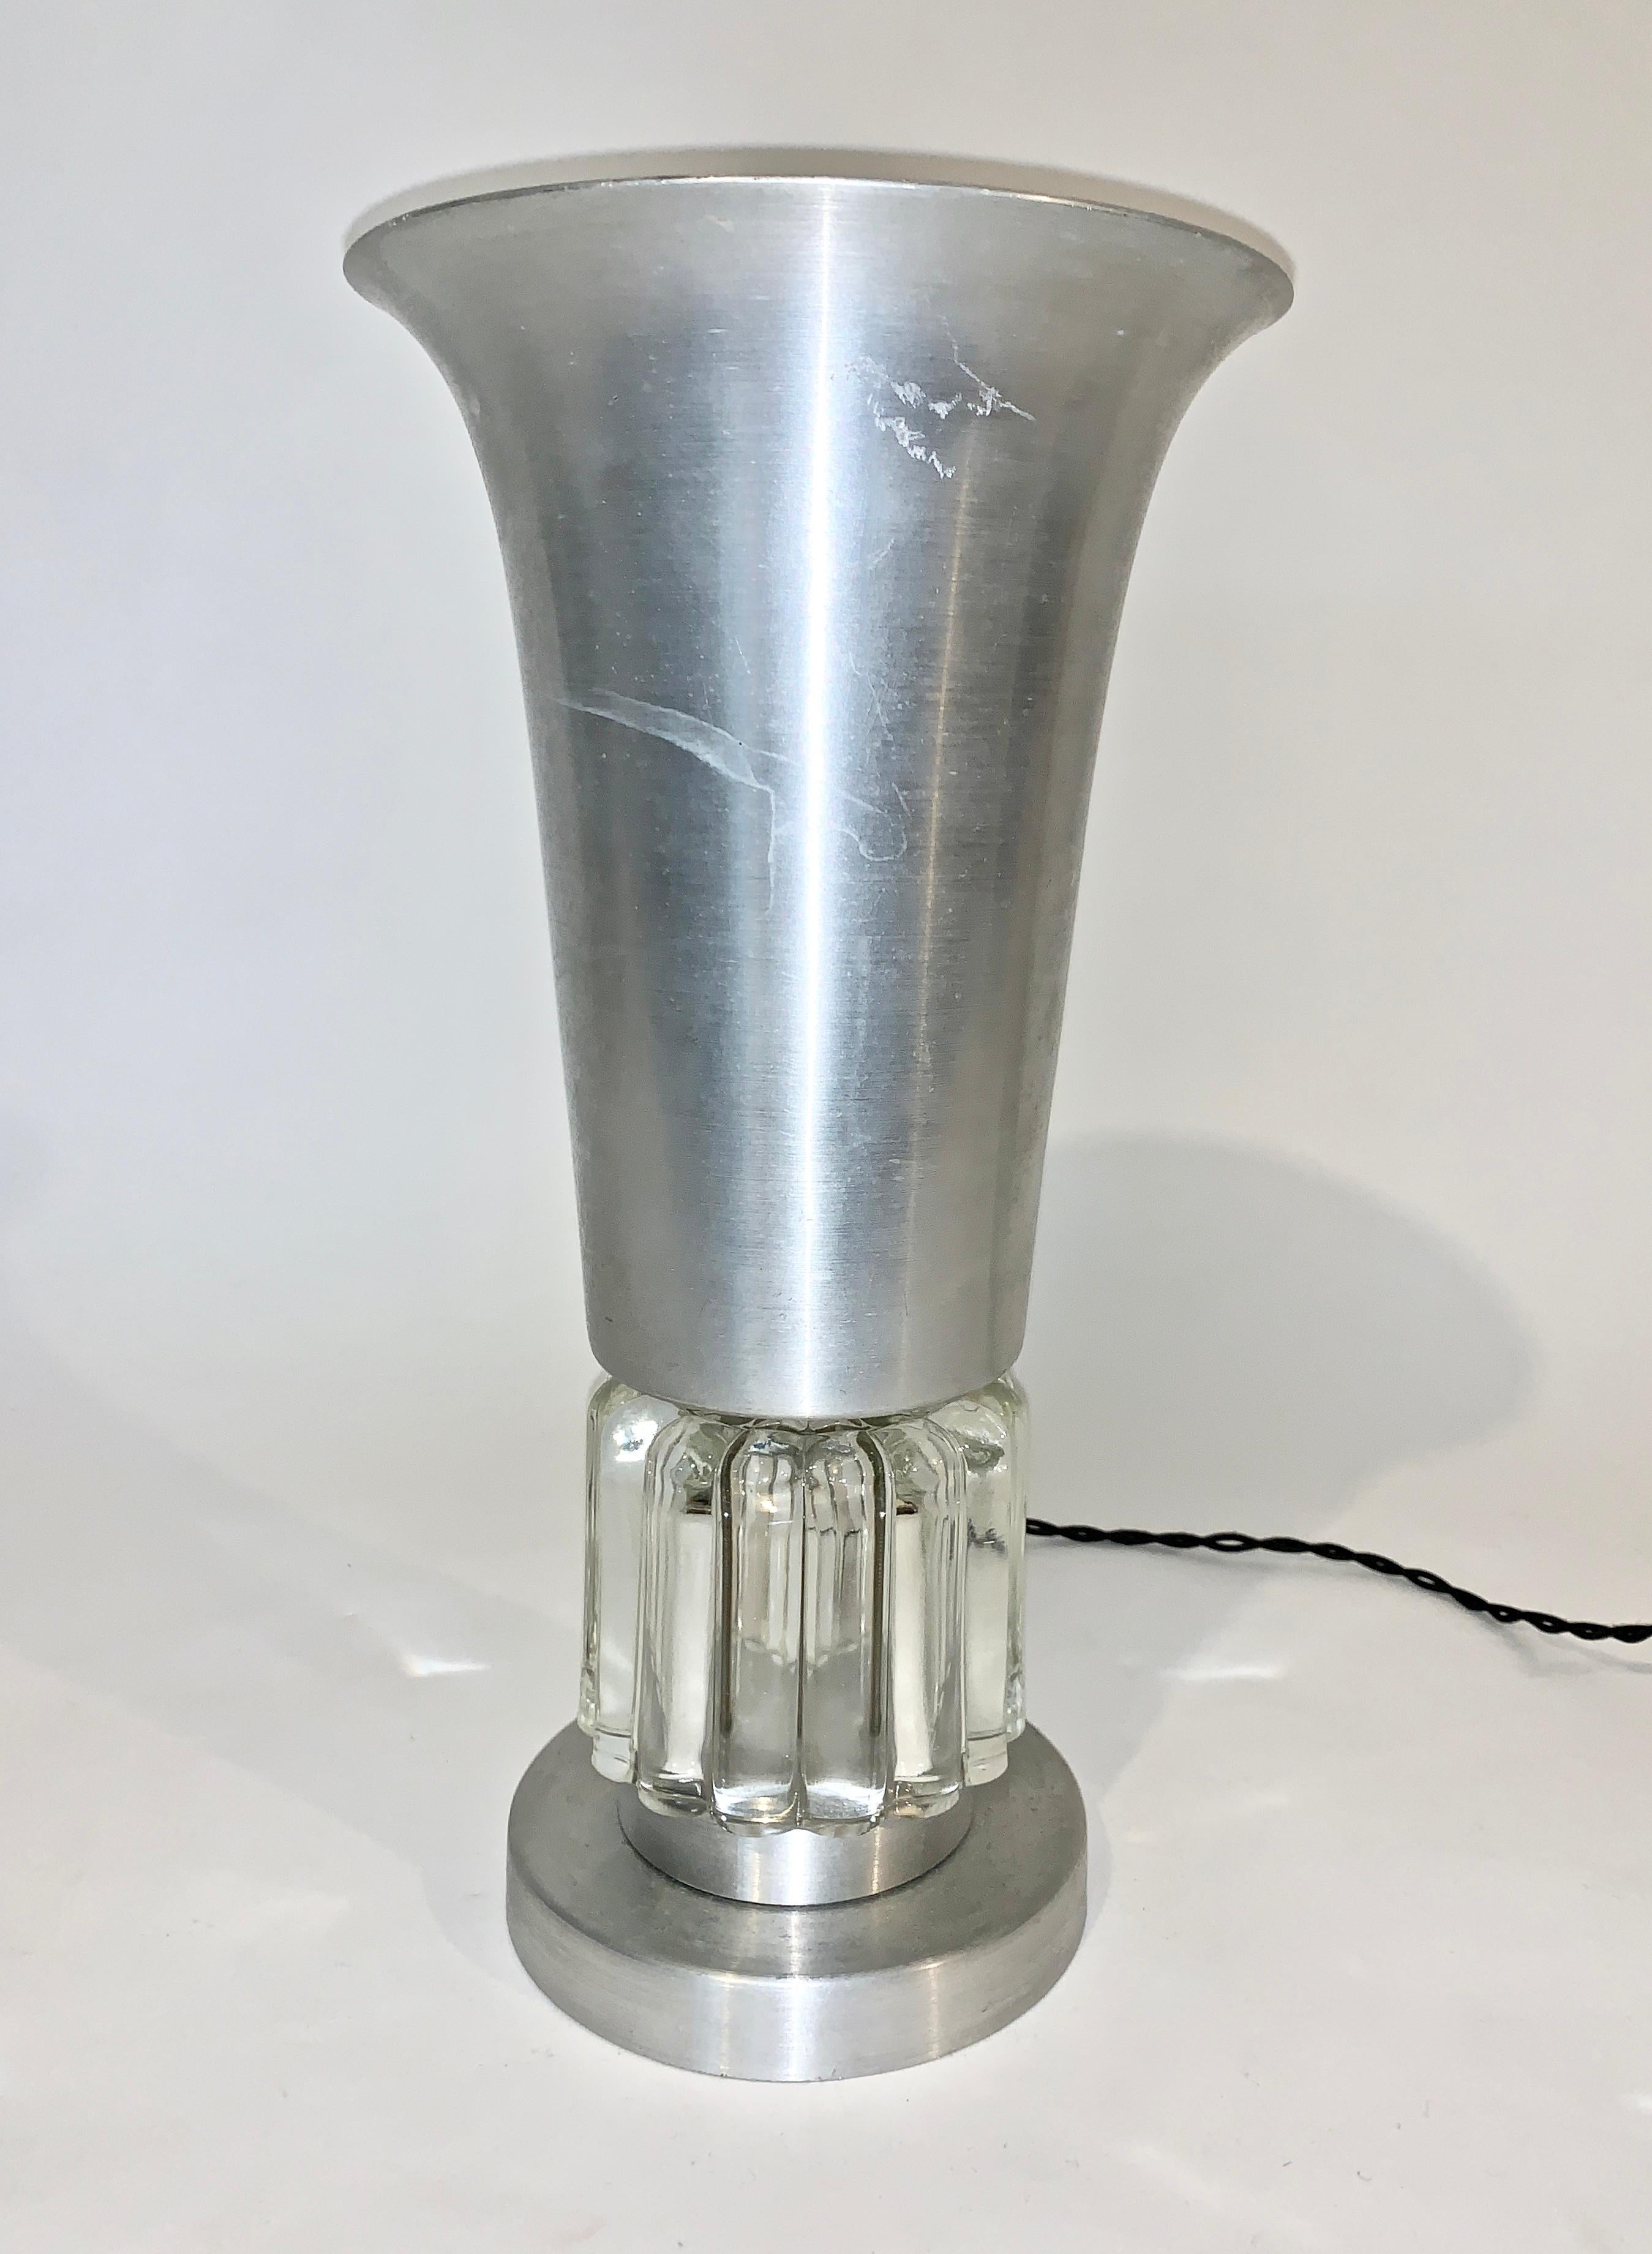 Art Deco brushed aluminum and clear glass table lamp, up light attributed to Russel Wright. Featuring a cast aluminum bell shade and round base with transparent ribbed glass detail. 